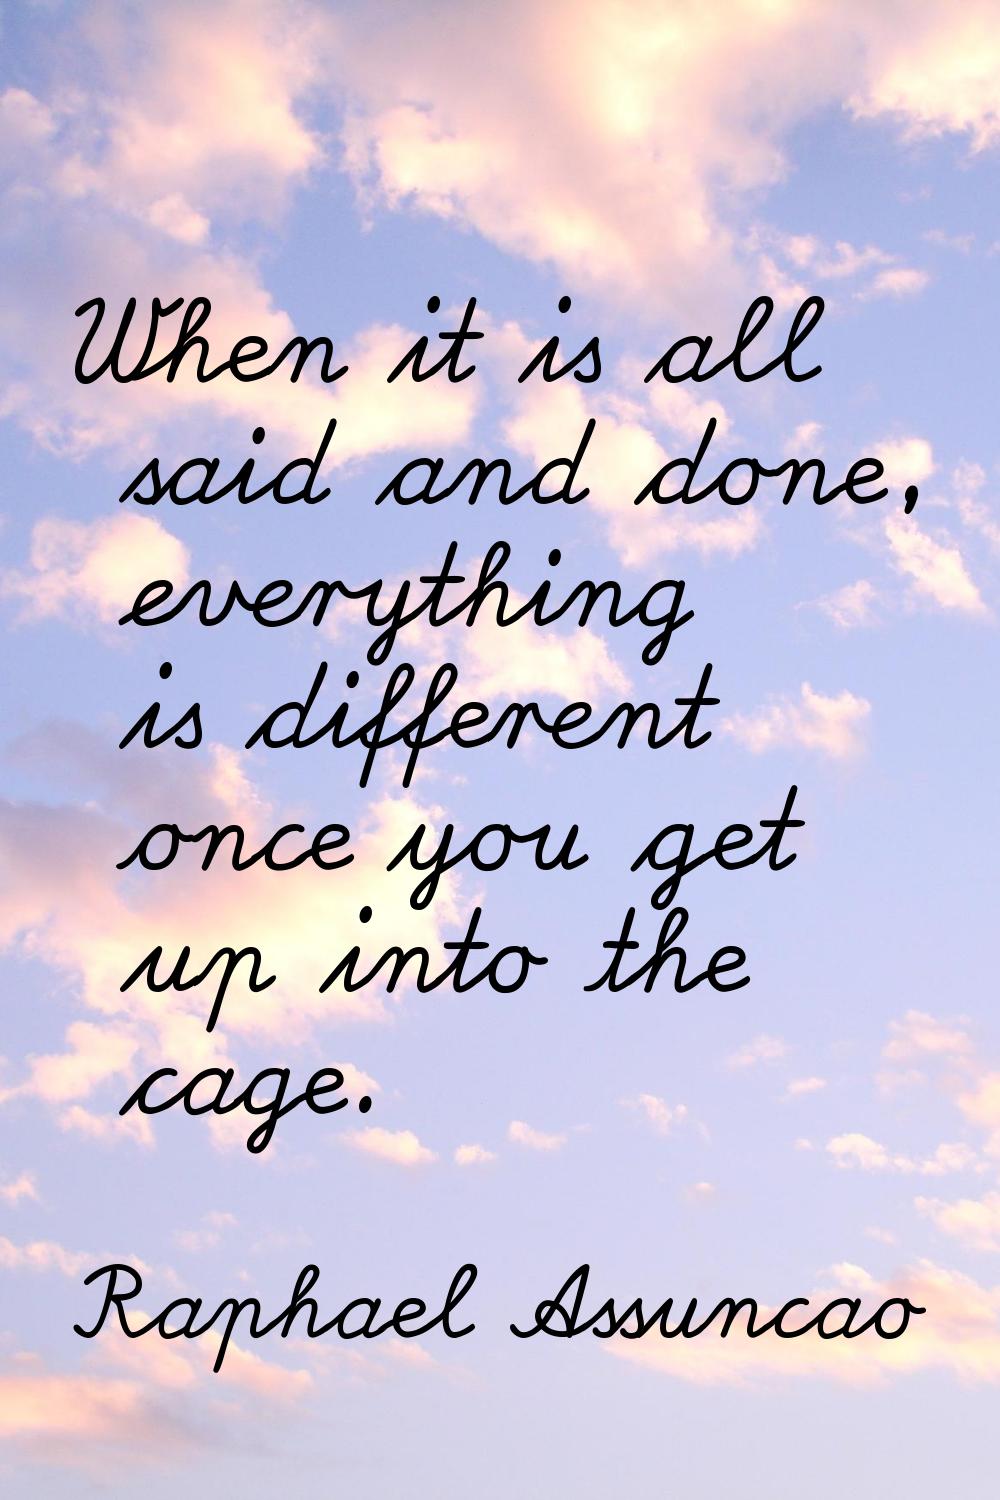 When it is all said and done, everything is different once you get up into the cage.